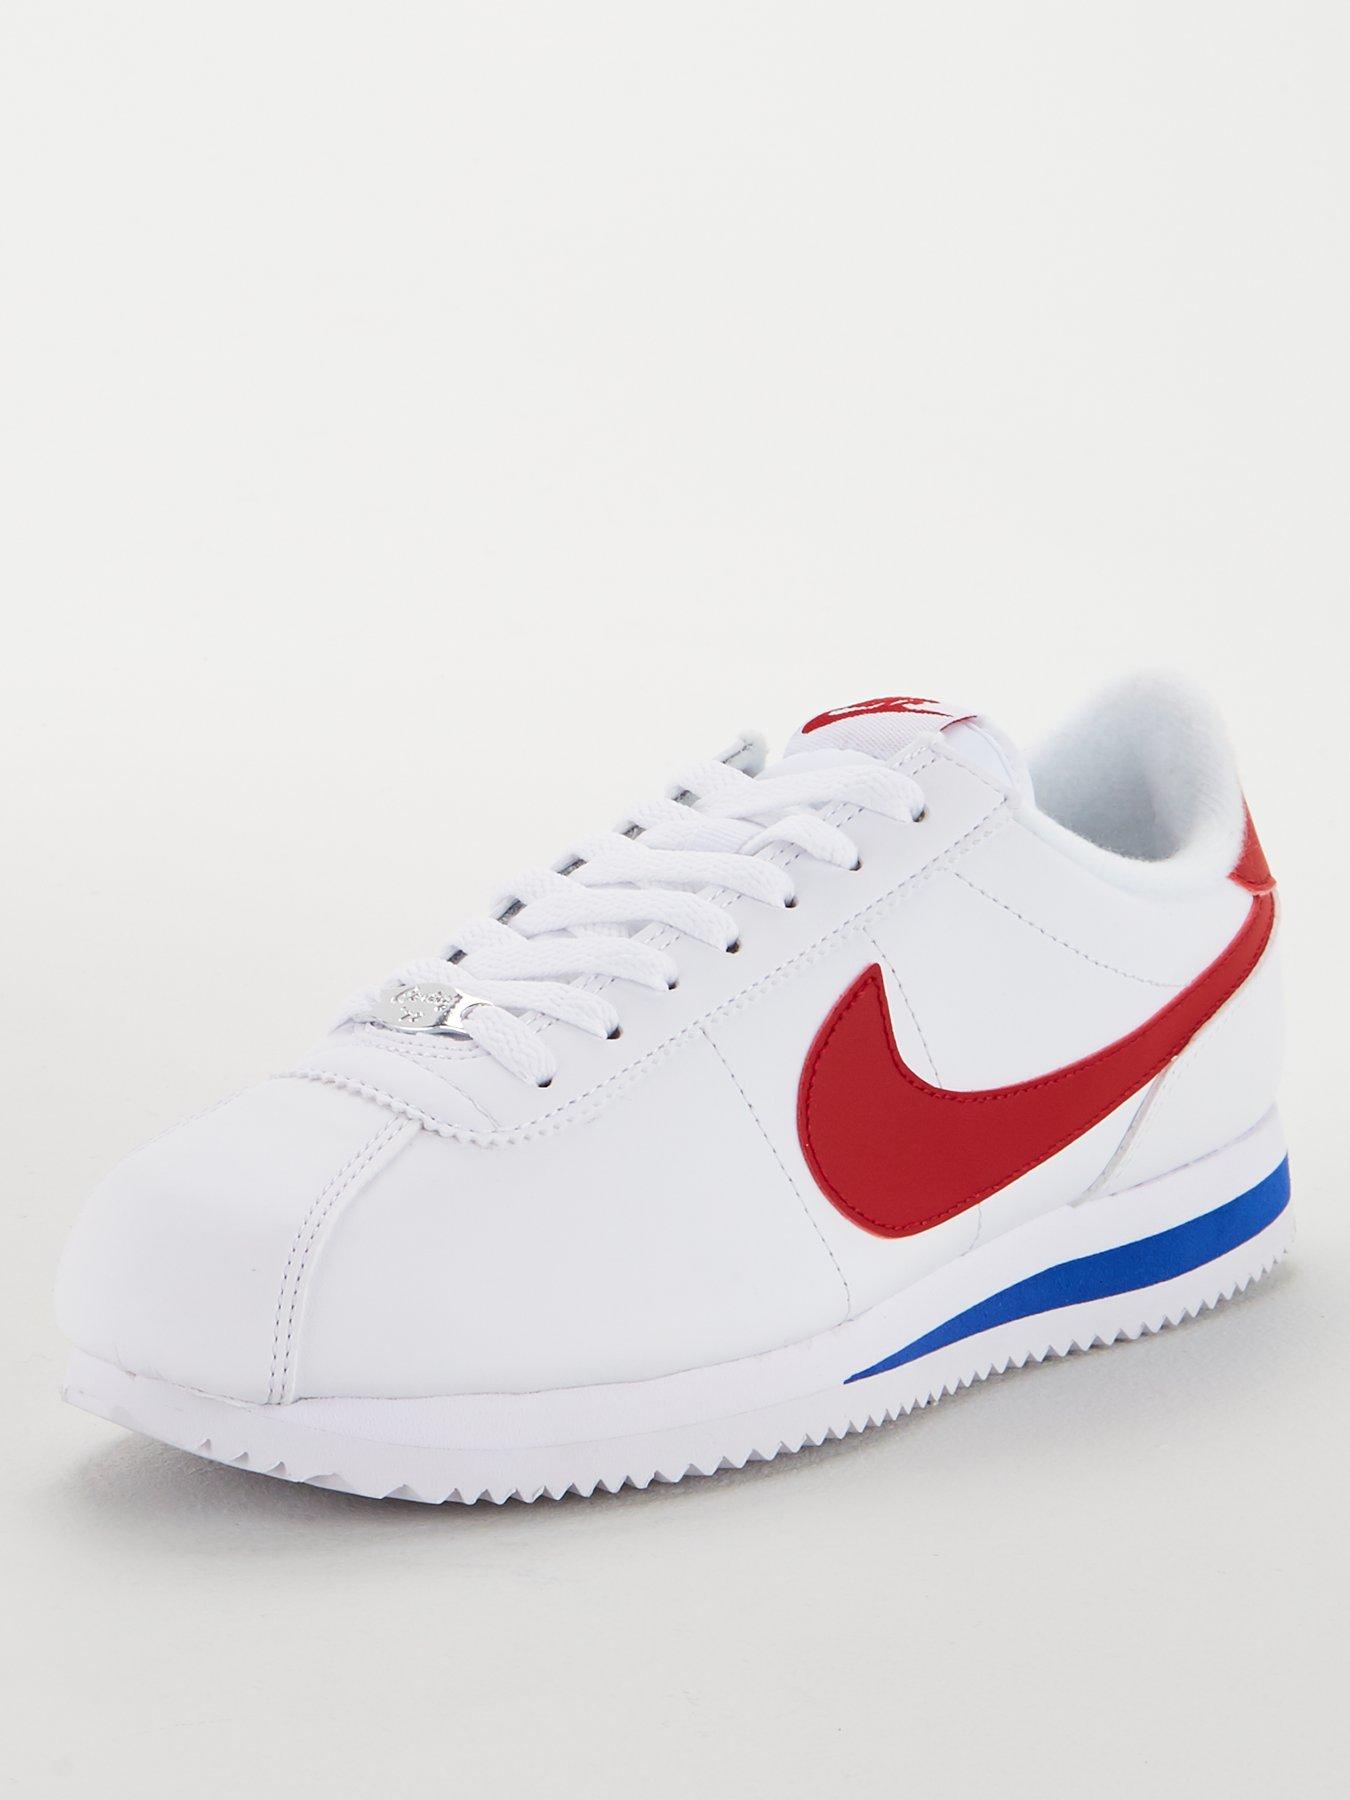 cortez red white and blue